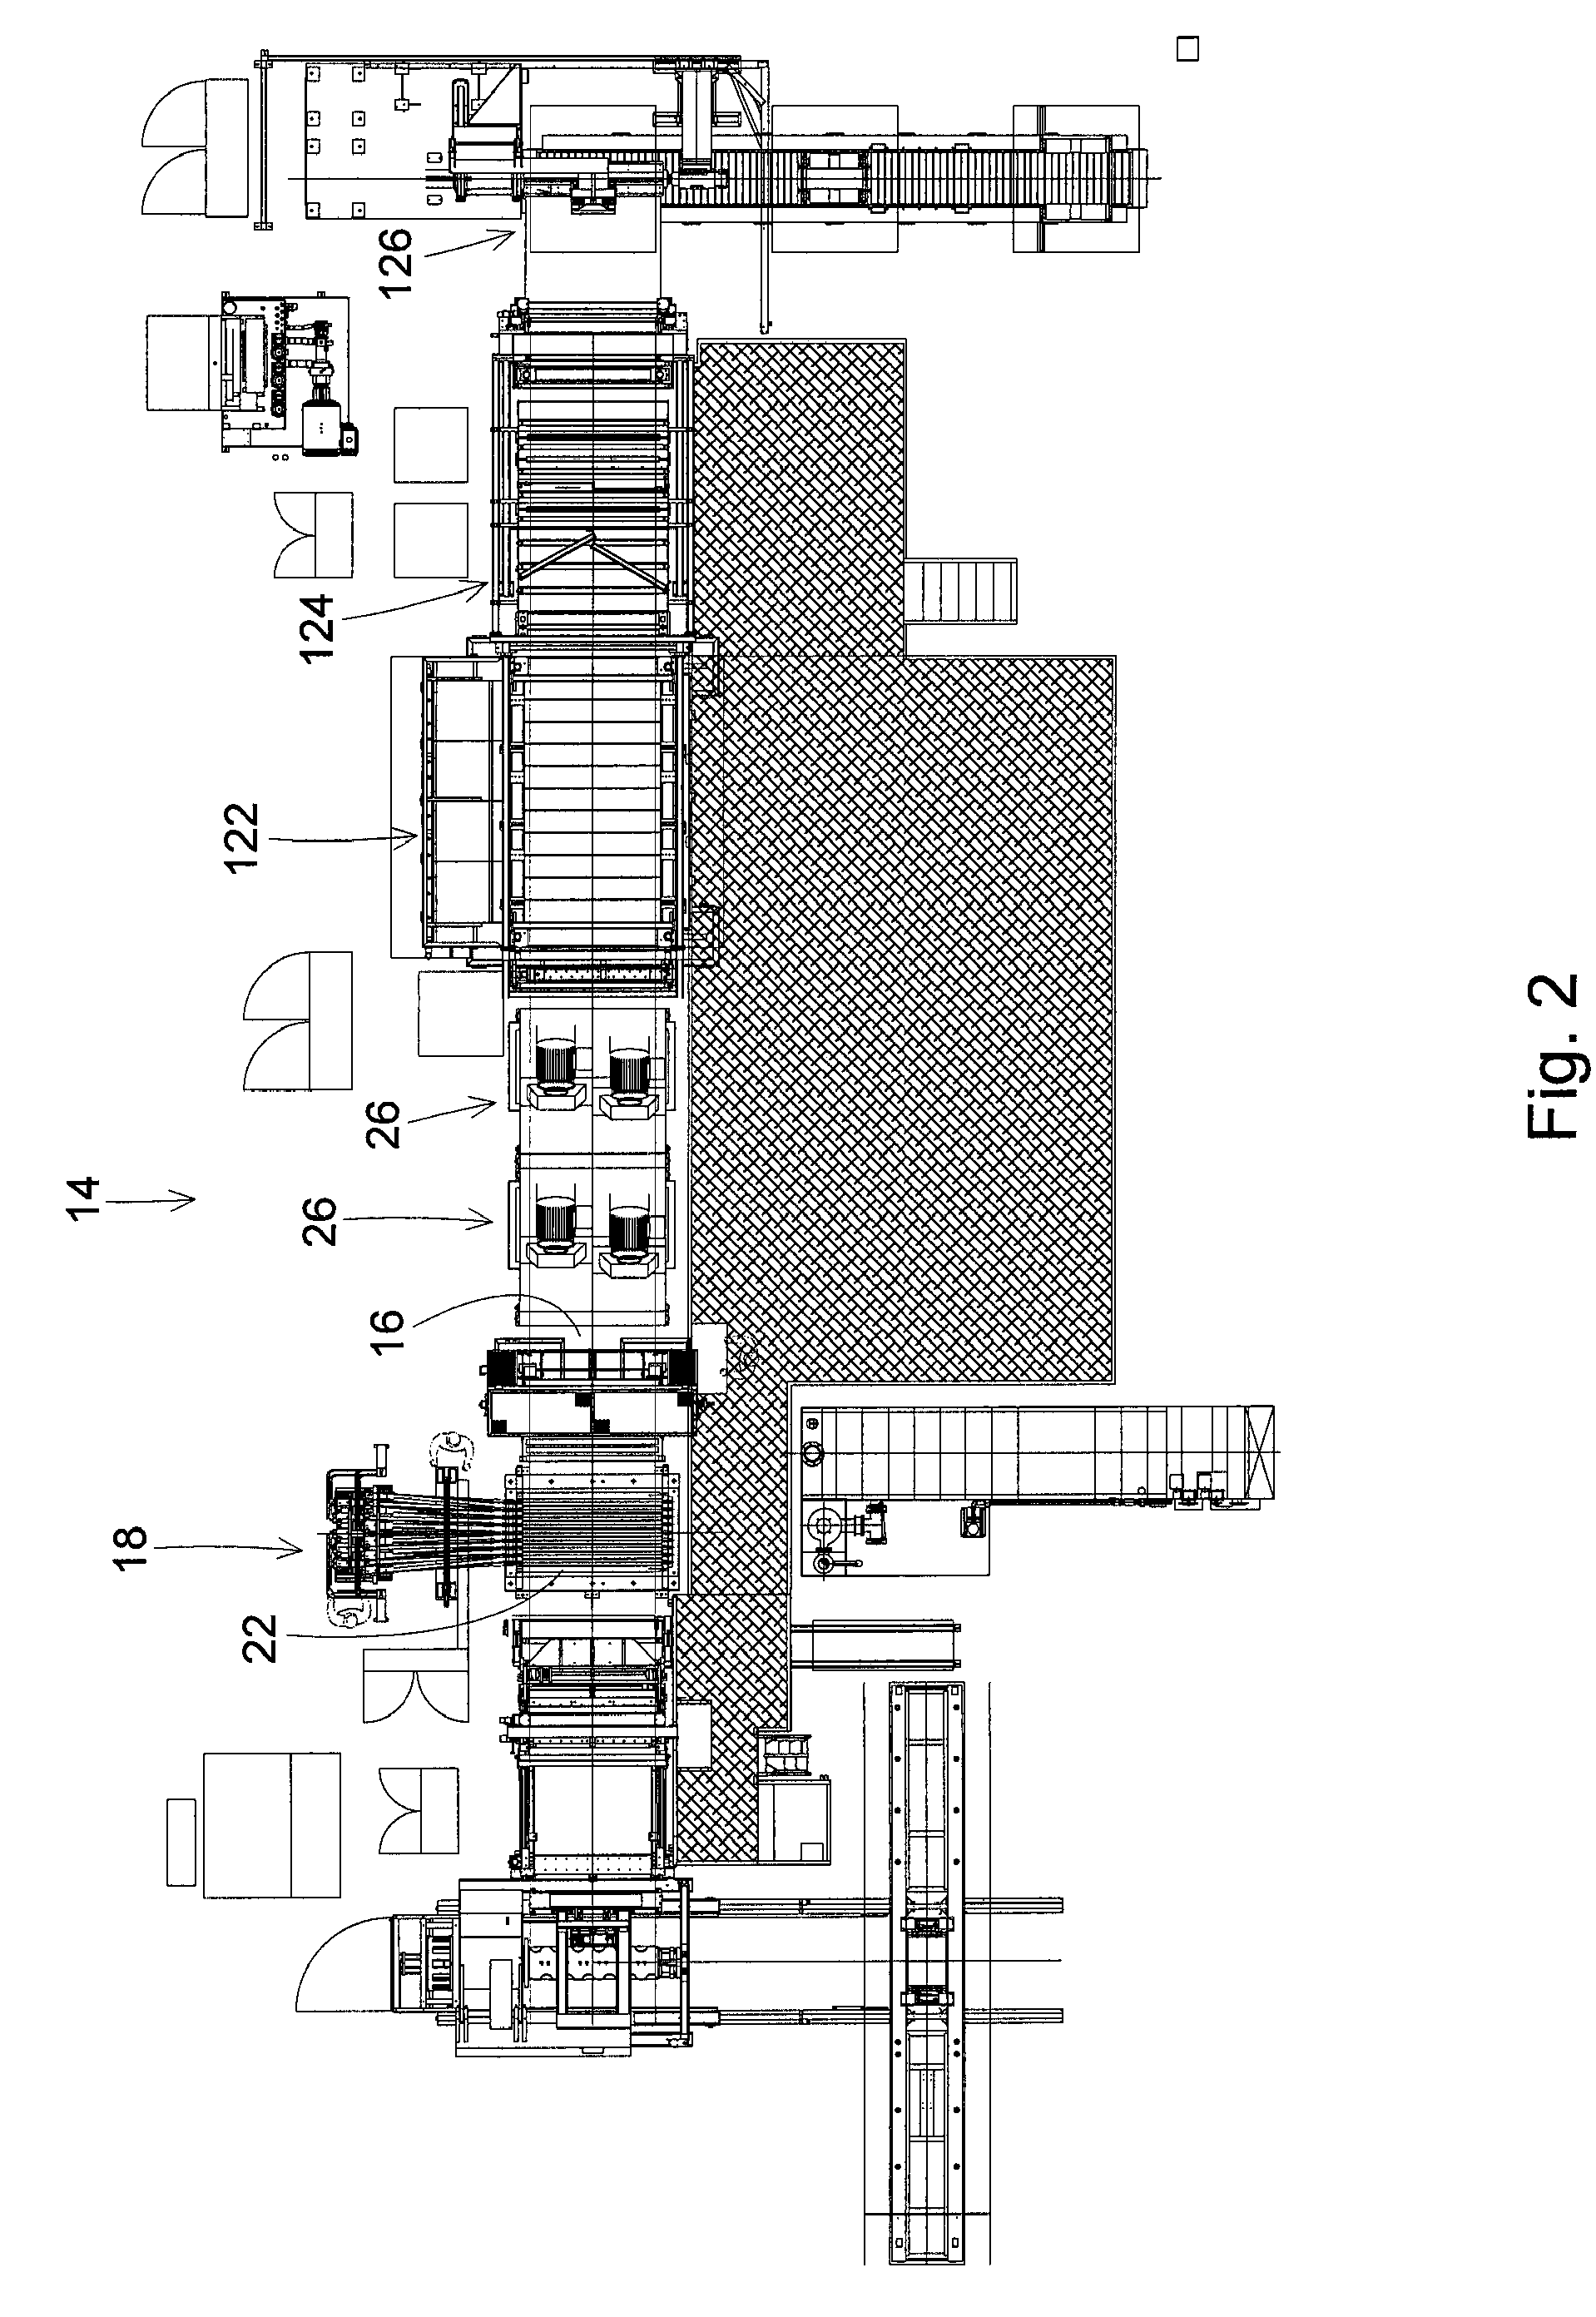 Slurry blasting apparatus for removing scale from sheet metal